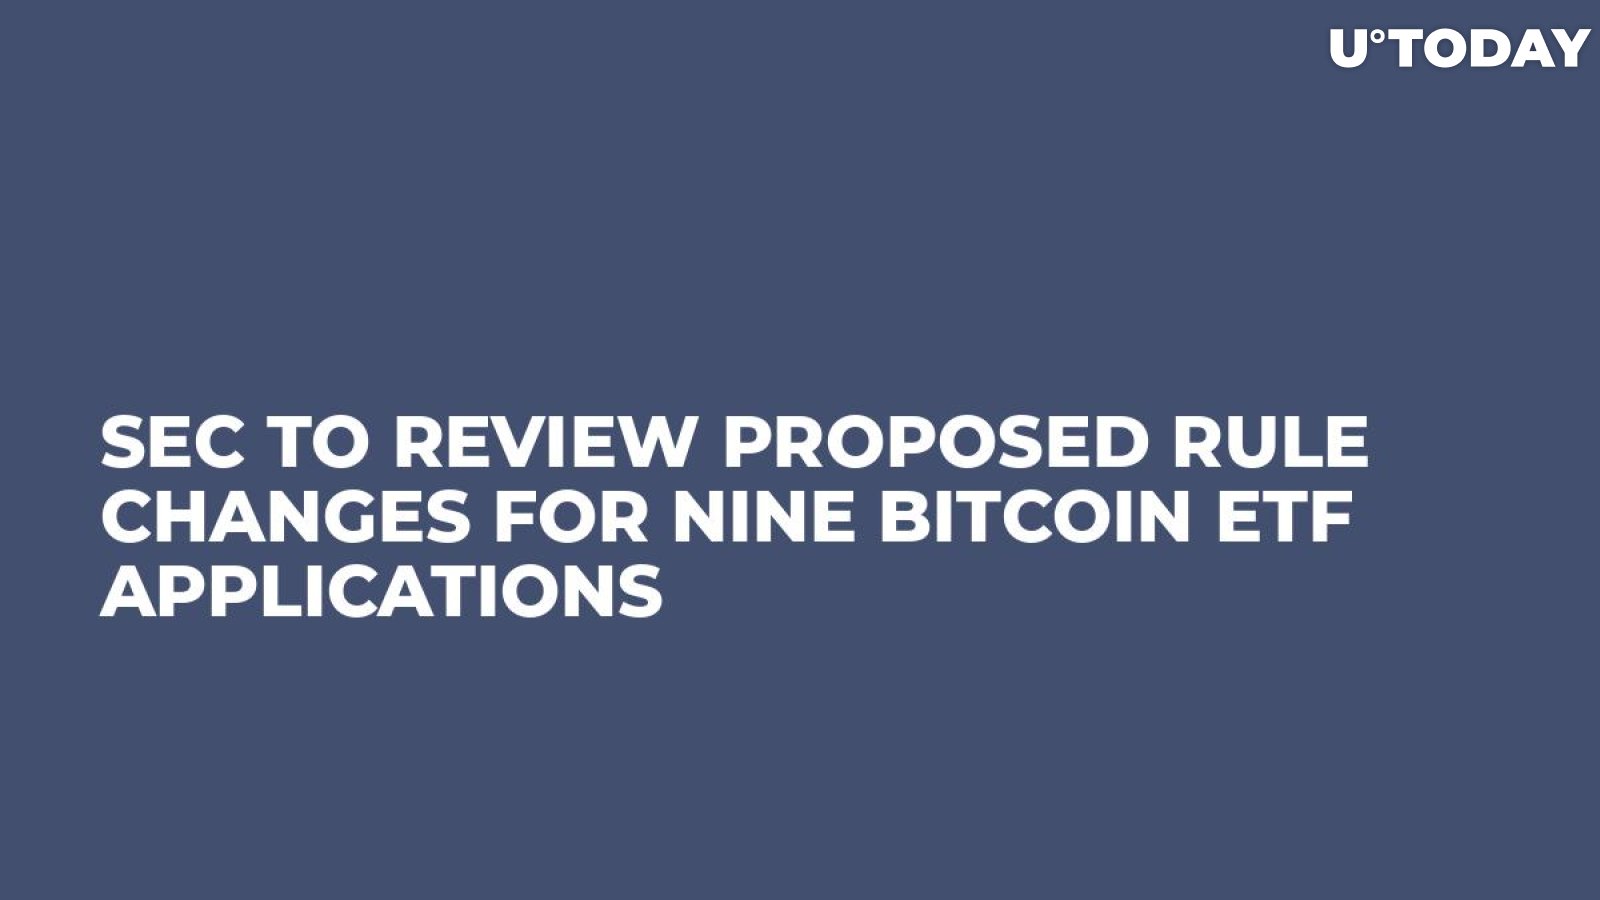 SEC To Review Proposed Rule Changes For Nine Bitcoin ETF Applications